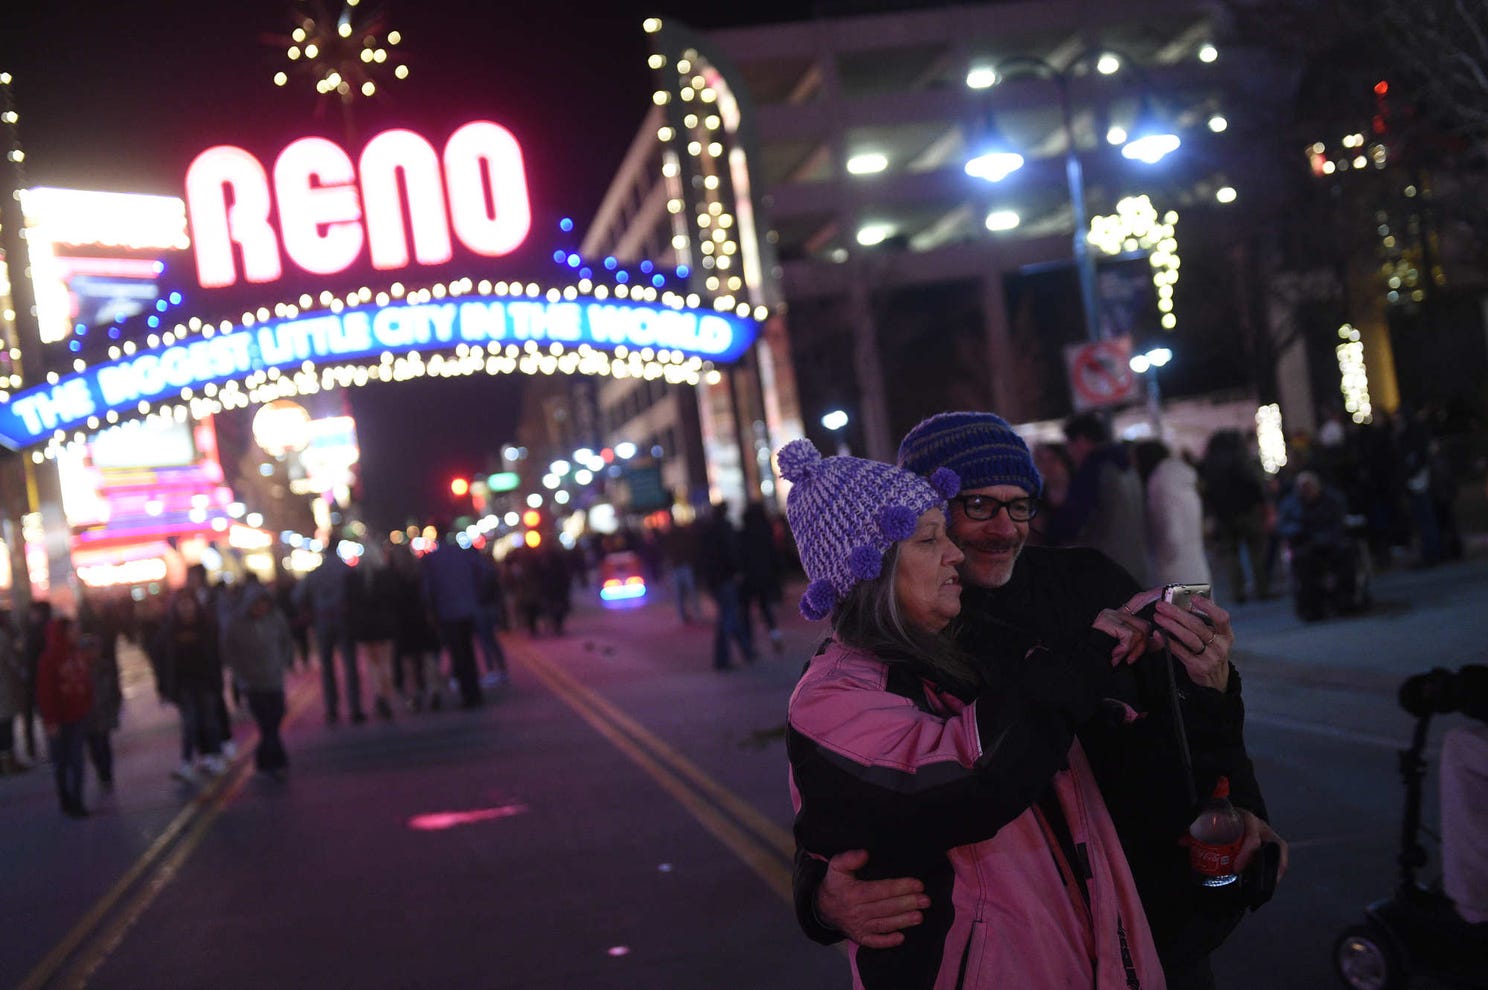 People celebrate the New Year in downtown Reno on Dec. 31, 2019 and Jan. 1 2020.